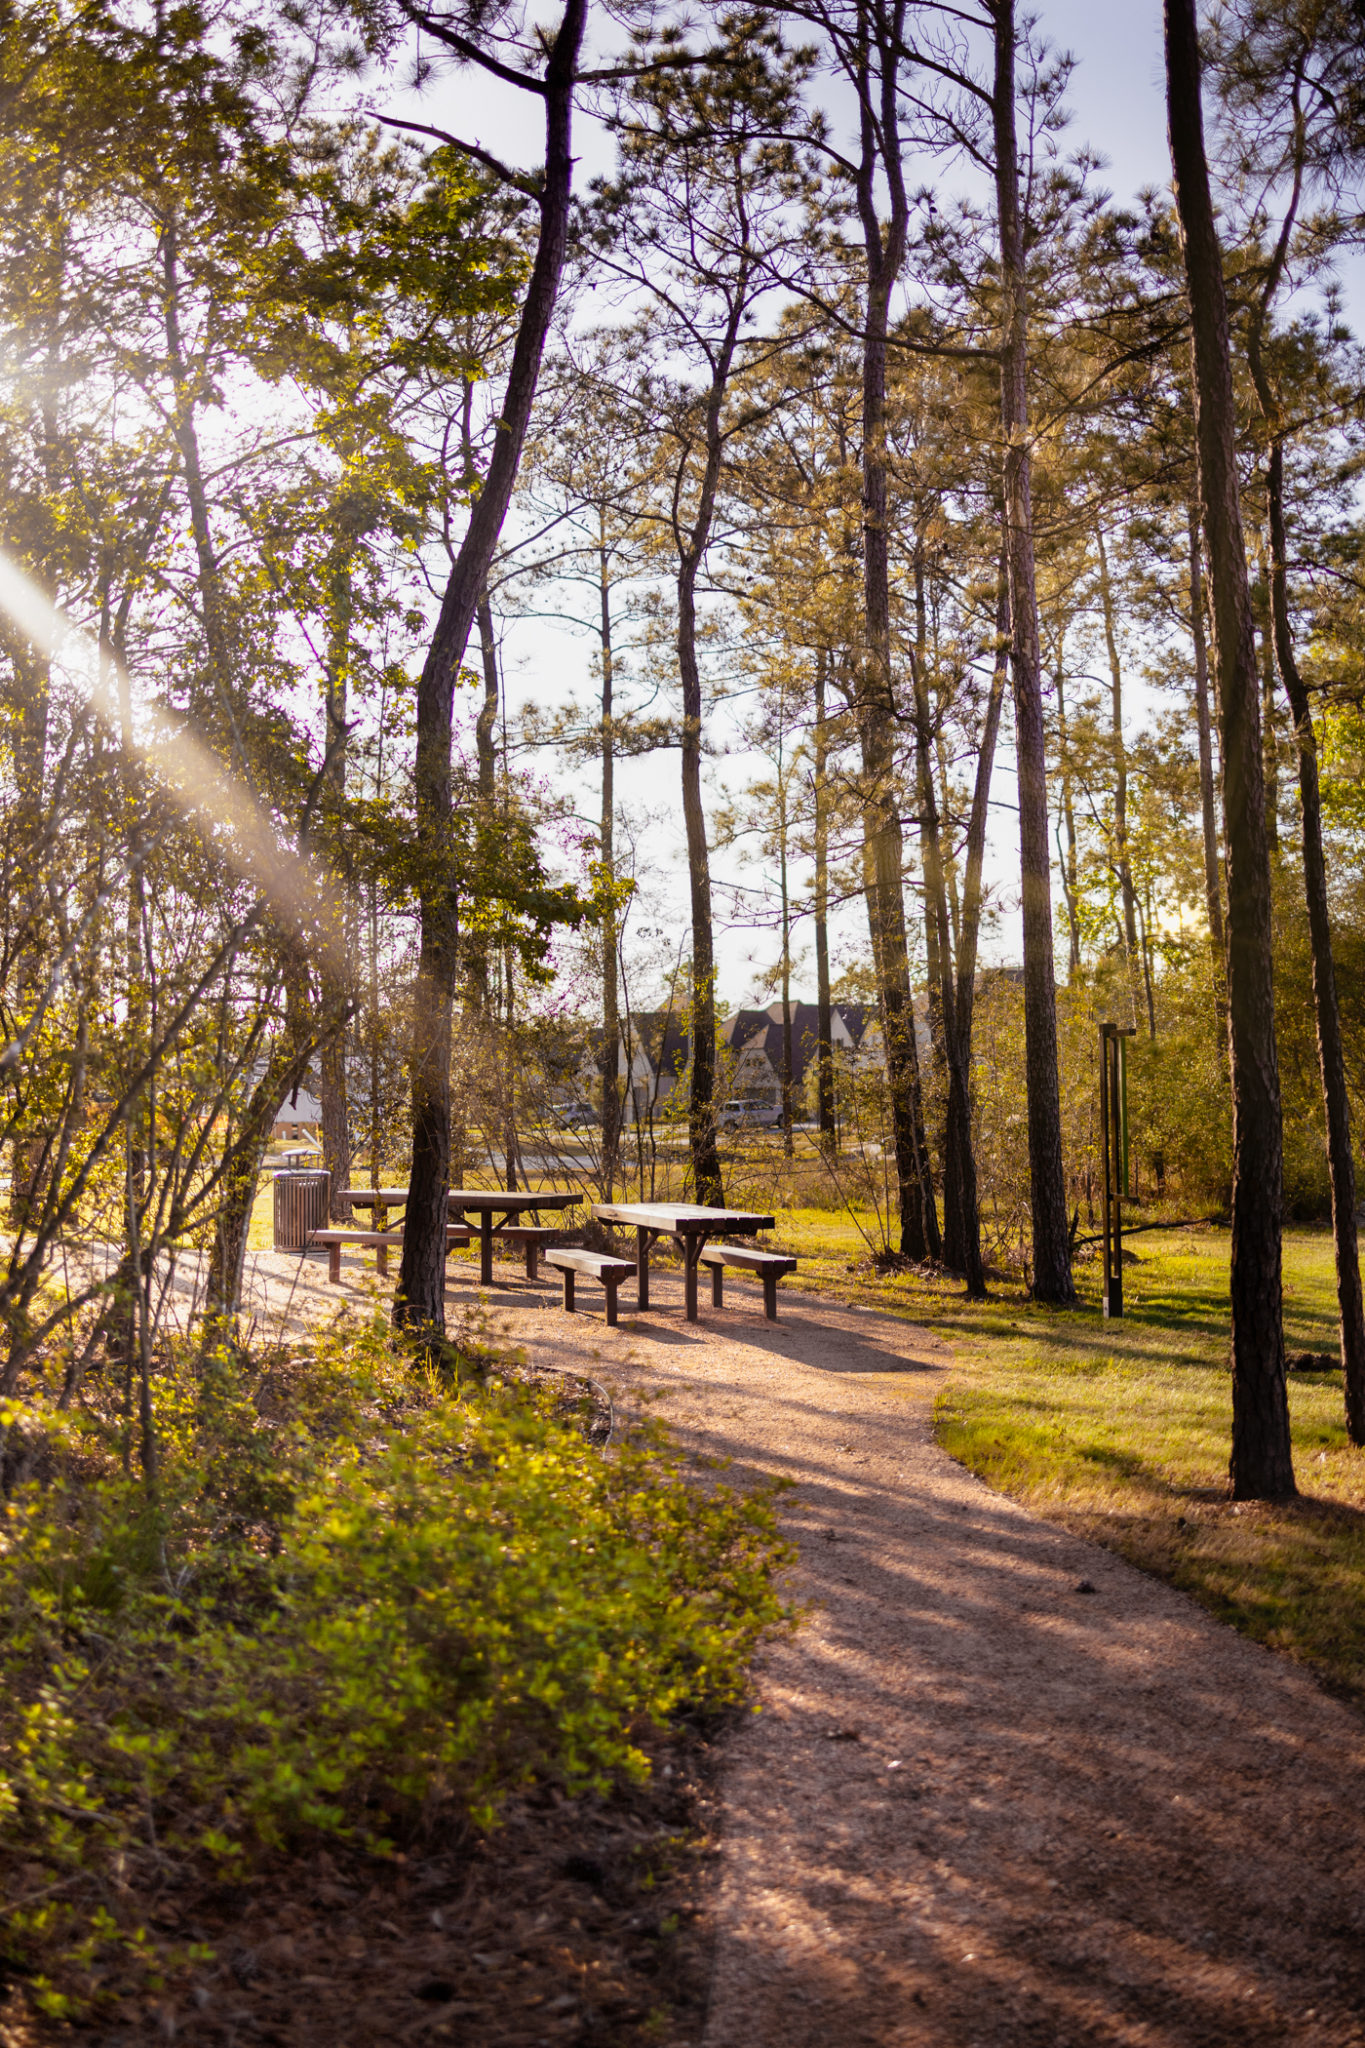 Picnic tables in Circuit Park allow residents to rest and relax during or after their workouts.